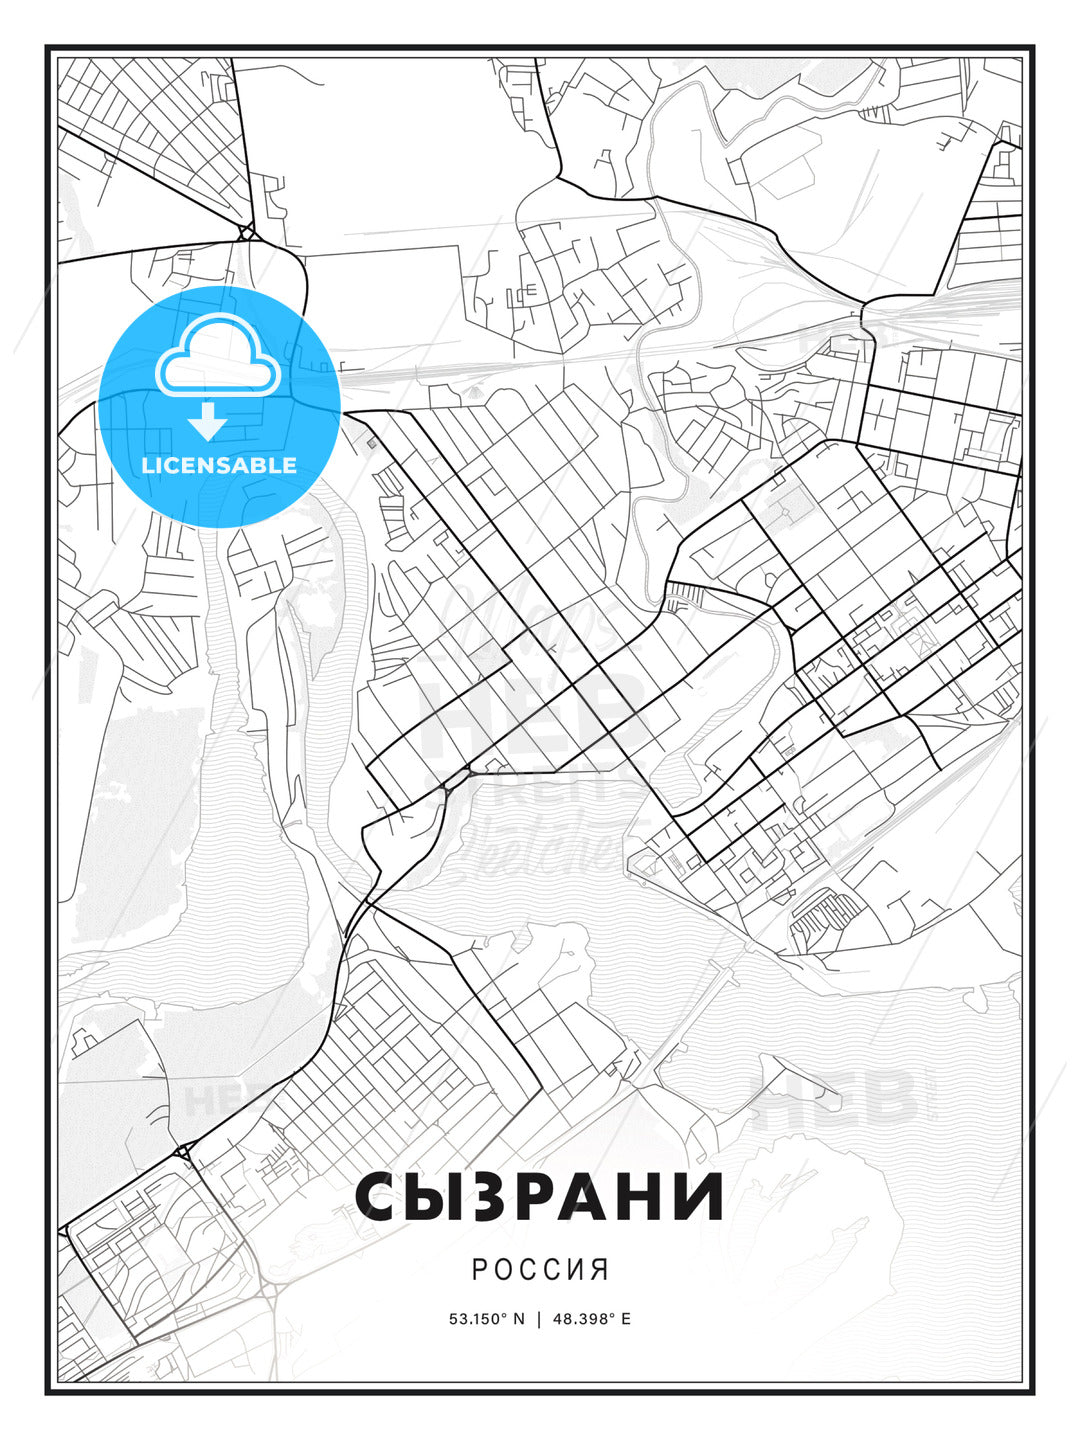 СЫЗРАНИ / Syzran, Russia, Modern Print Template in Various Formats - HEBSTREITS Sketches